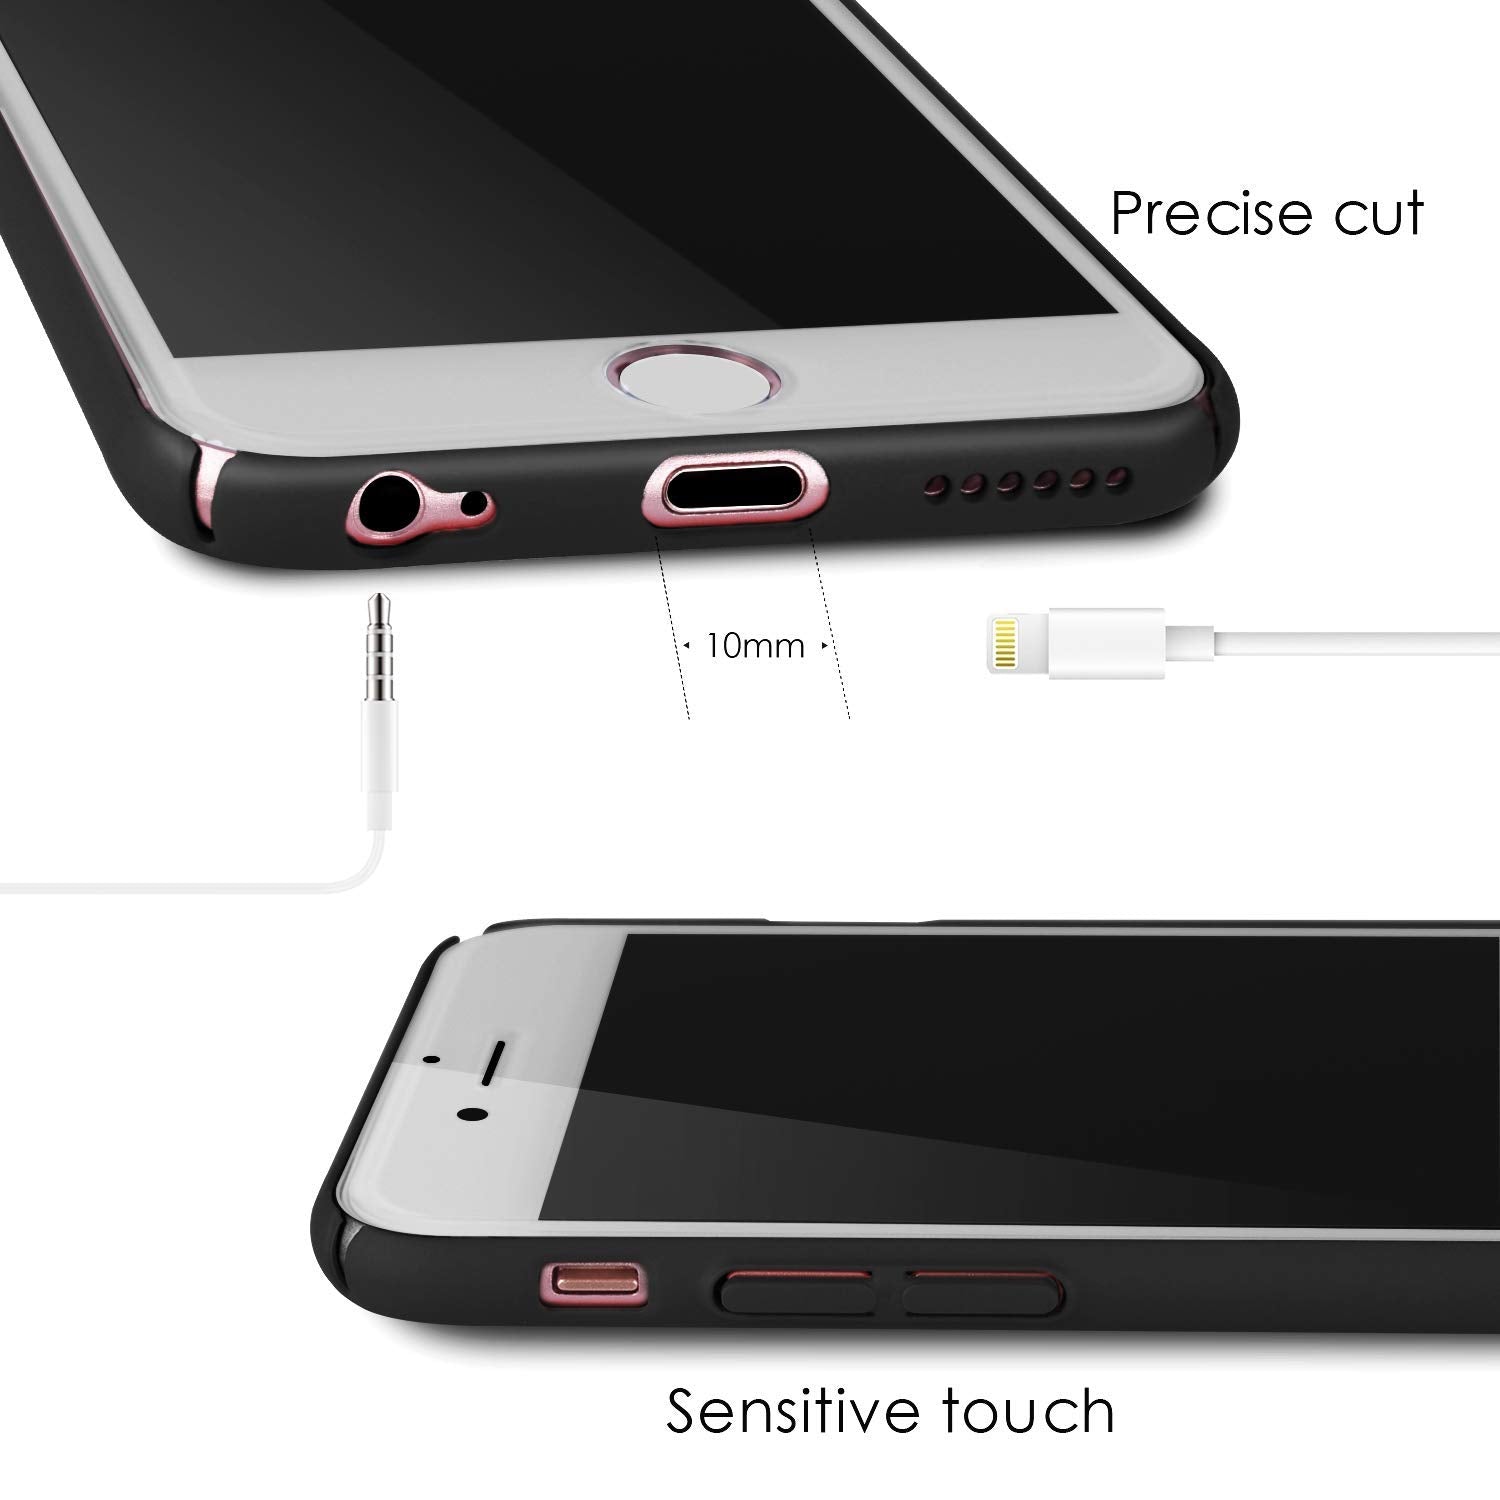 Roopose Phone Protective Case Ultra Thin Slim Skin Touch Feel Hard Cover Protect Bumper Fit Phone Shell Case Compatible with iPhone 6/6s